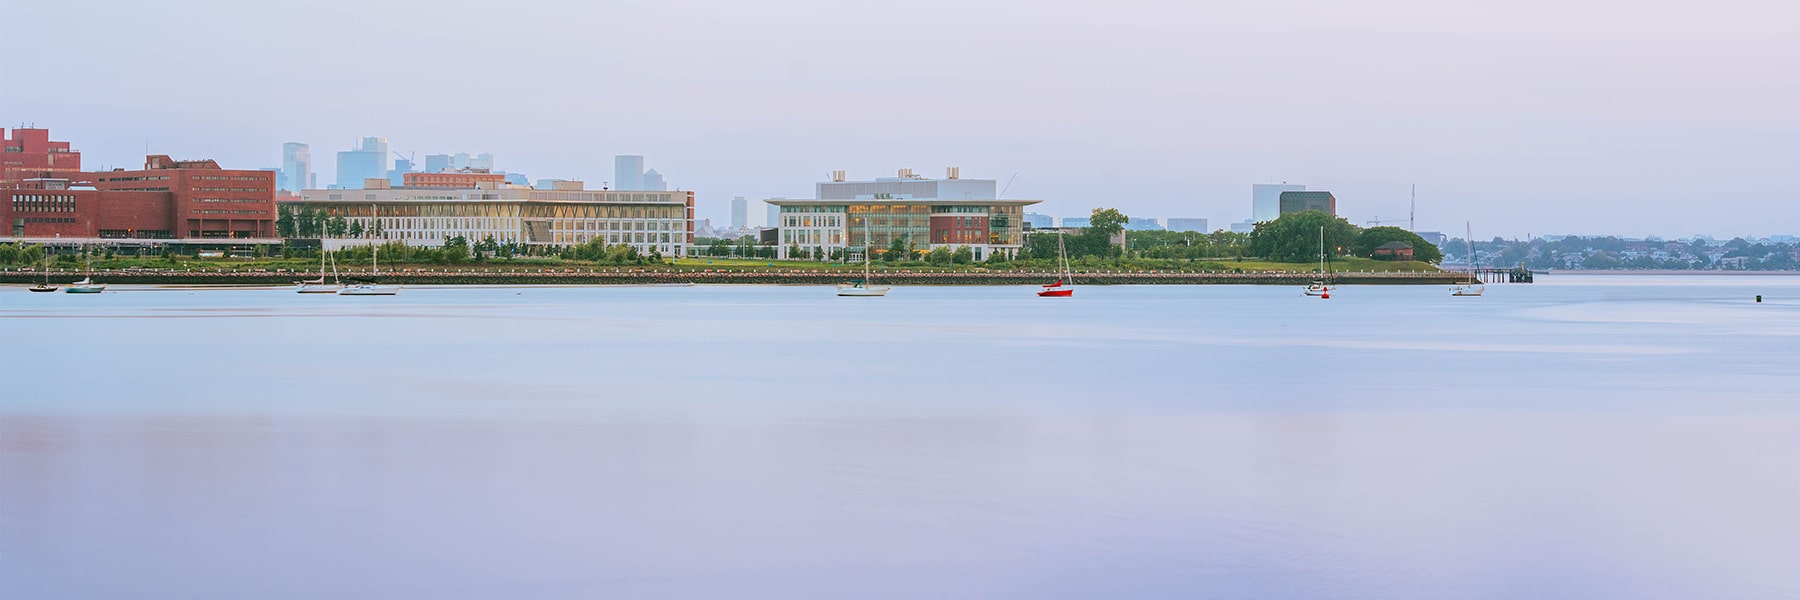 Sunset view of campus from the water